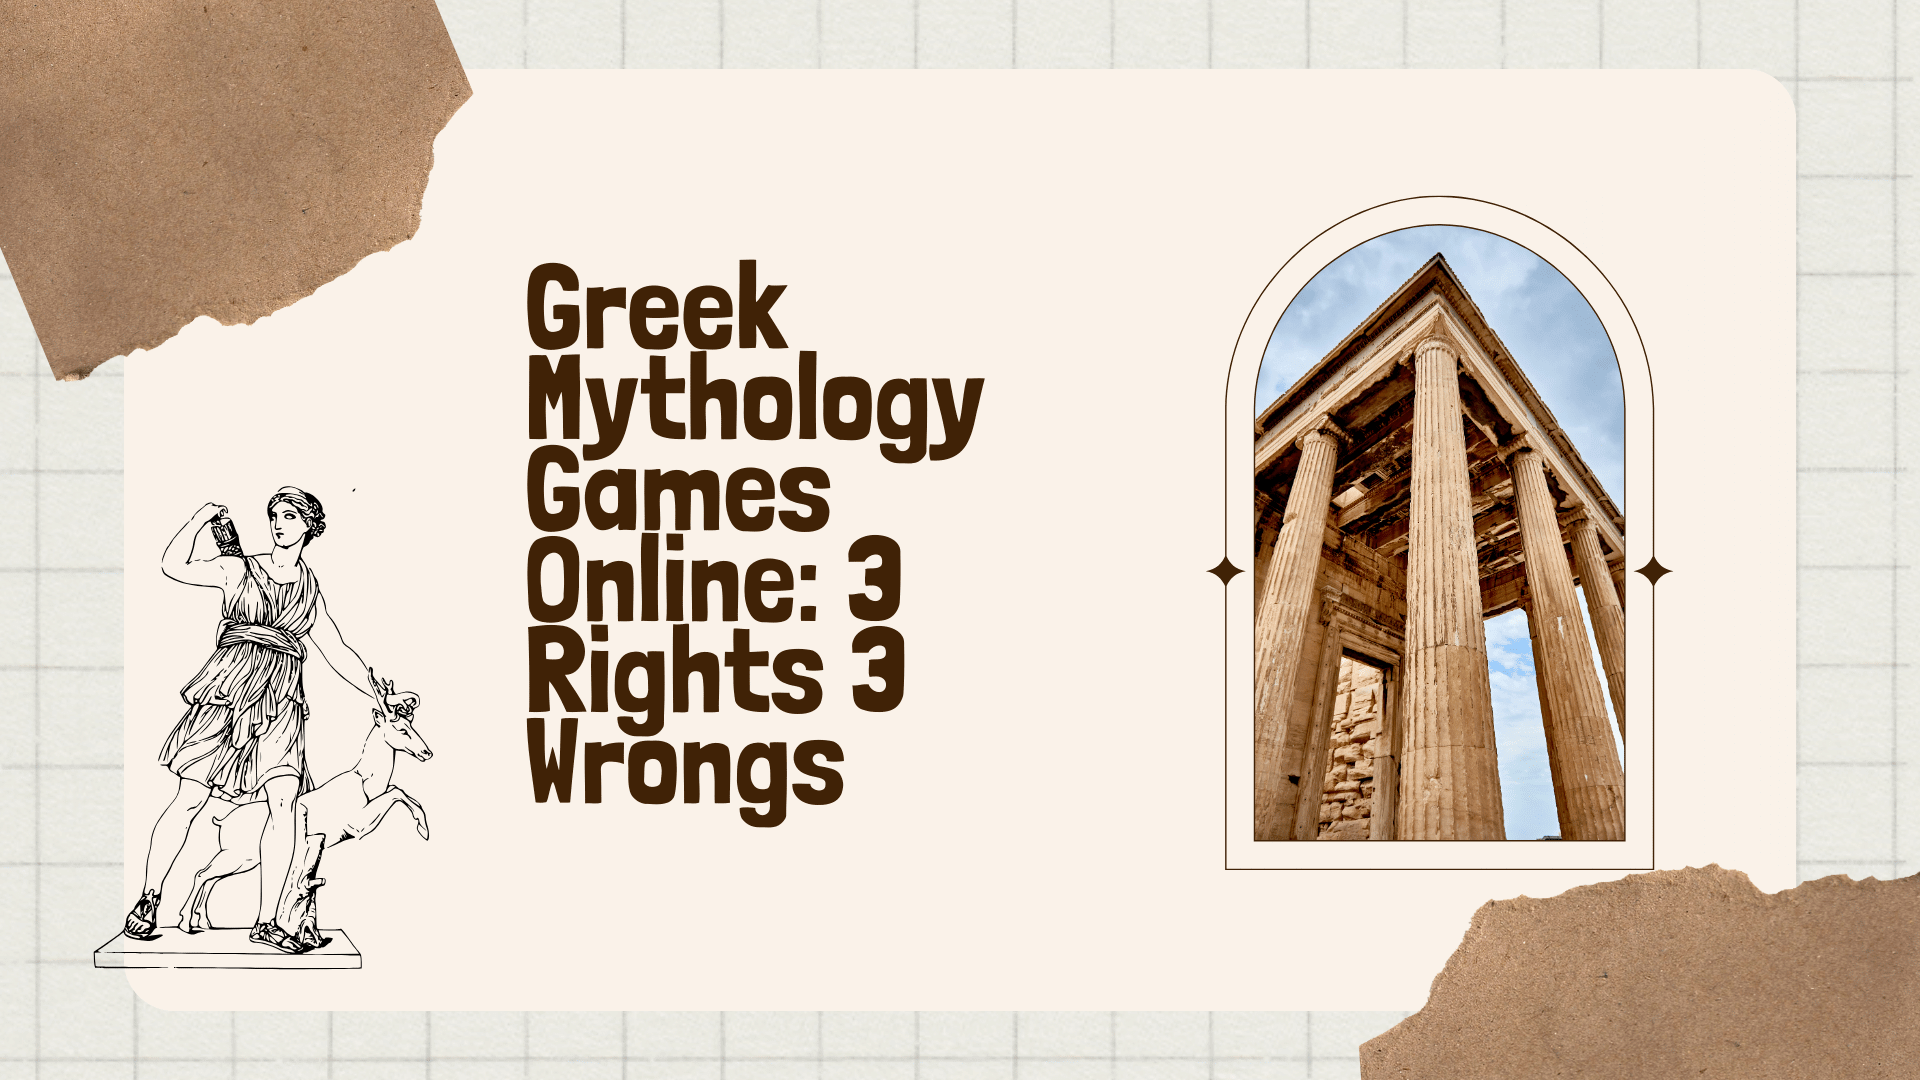 Greek Mythology Games Online: 3 Rights 3 Wrongs